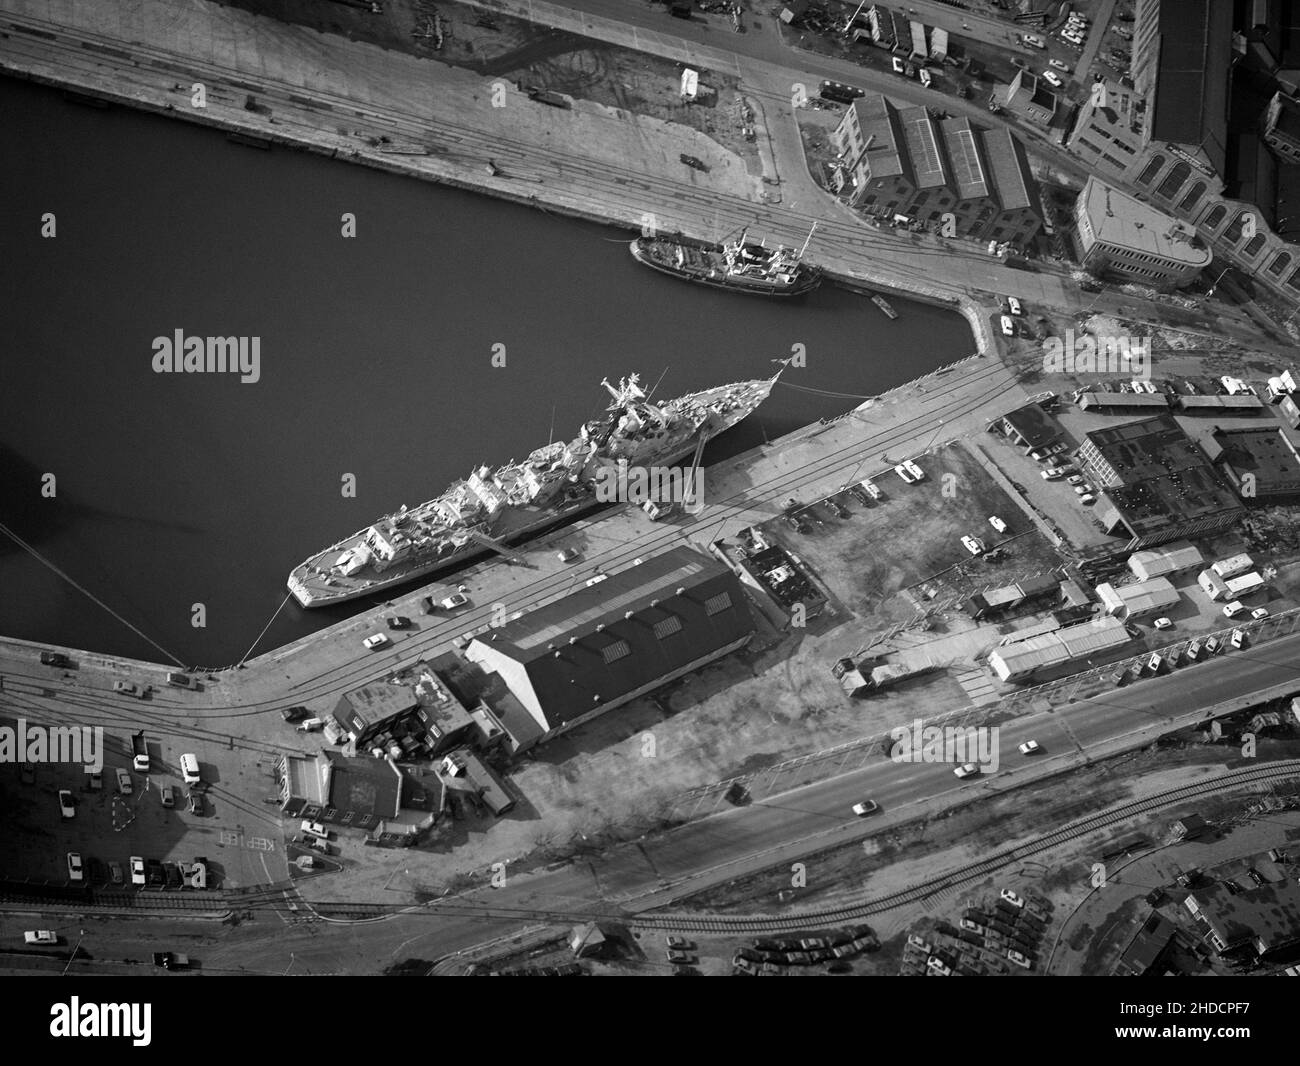 An aerial view of Southampton Docks showing HMS Cavalier at her moorings as a museum, Southampton, Hampshire, England, UK Stock Photo